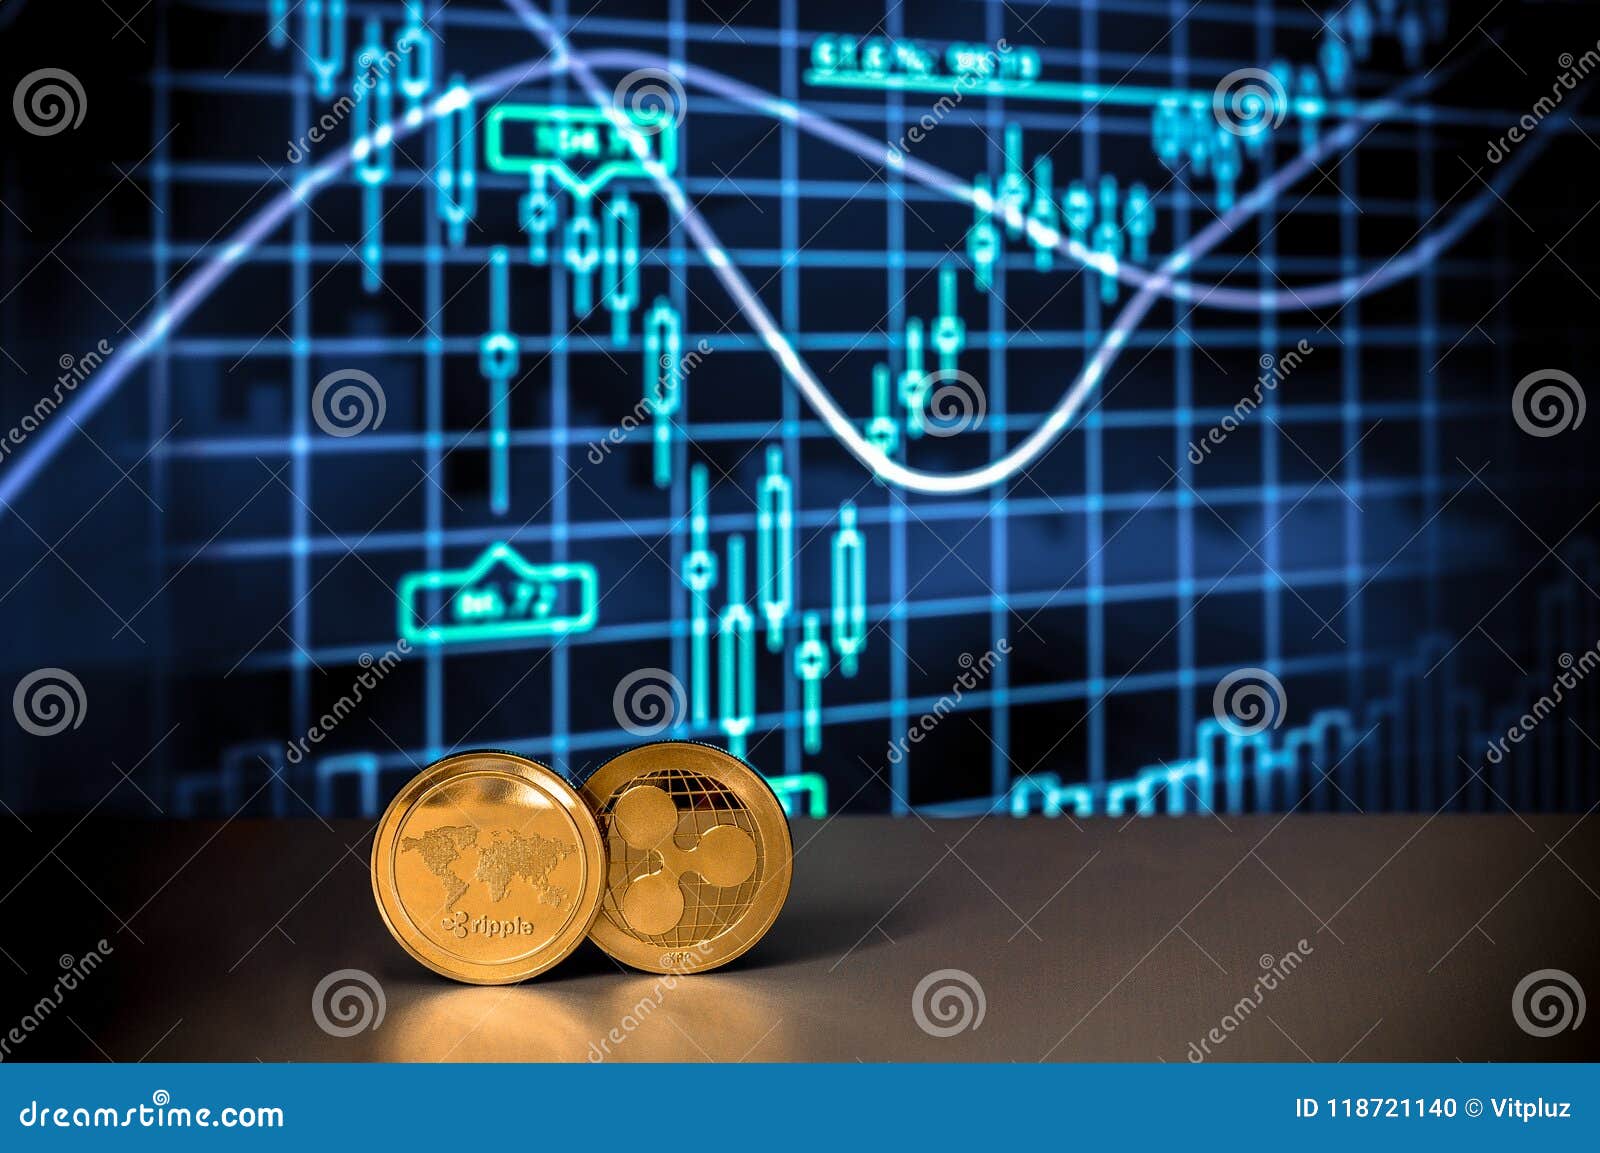 bank coin crypto currency charts